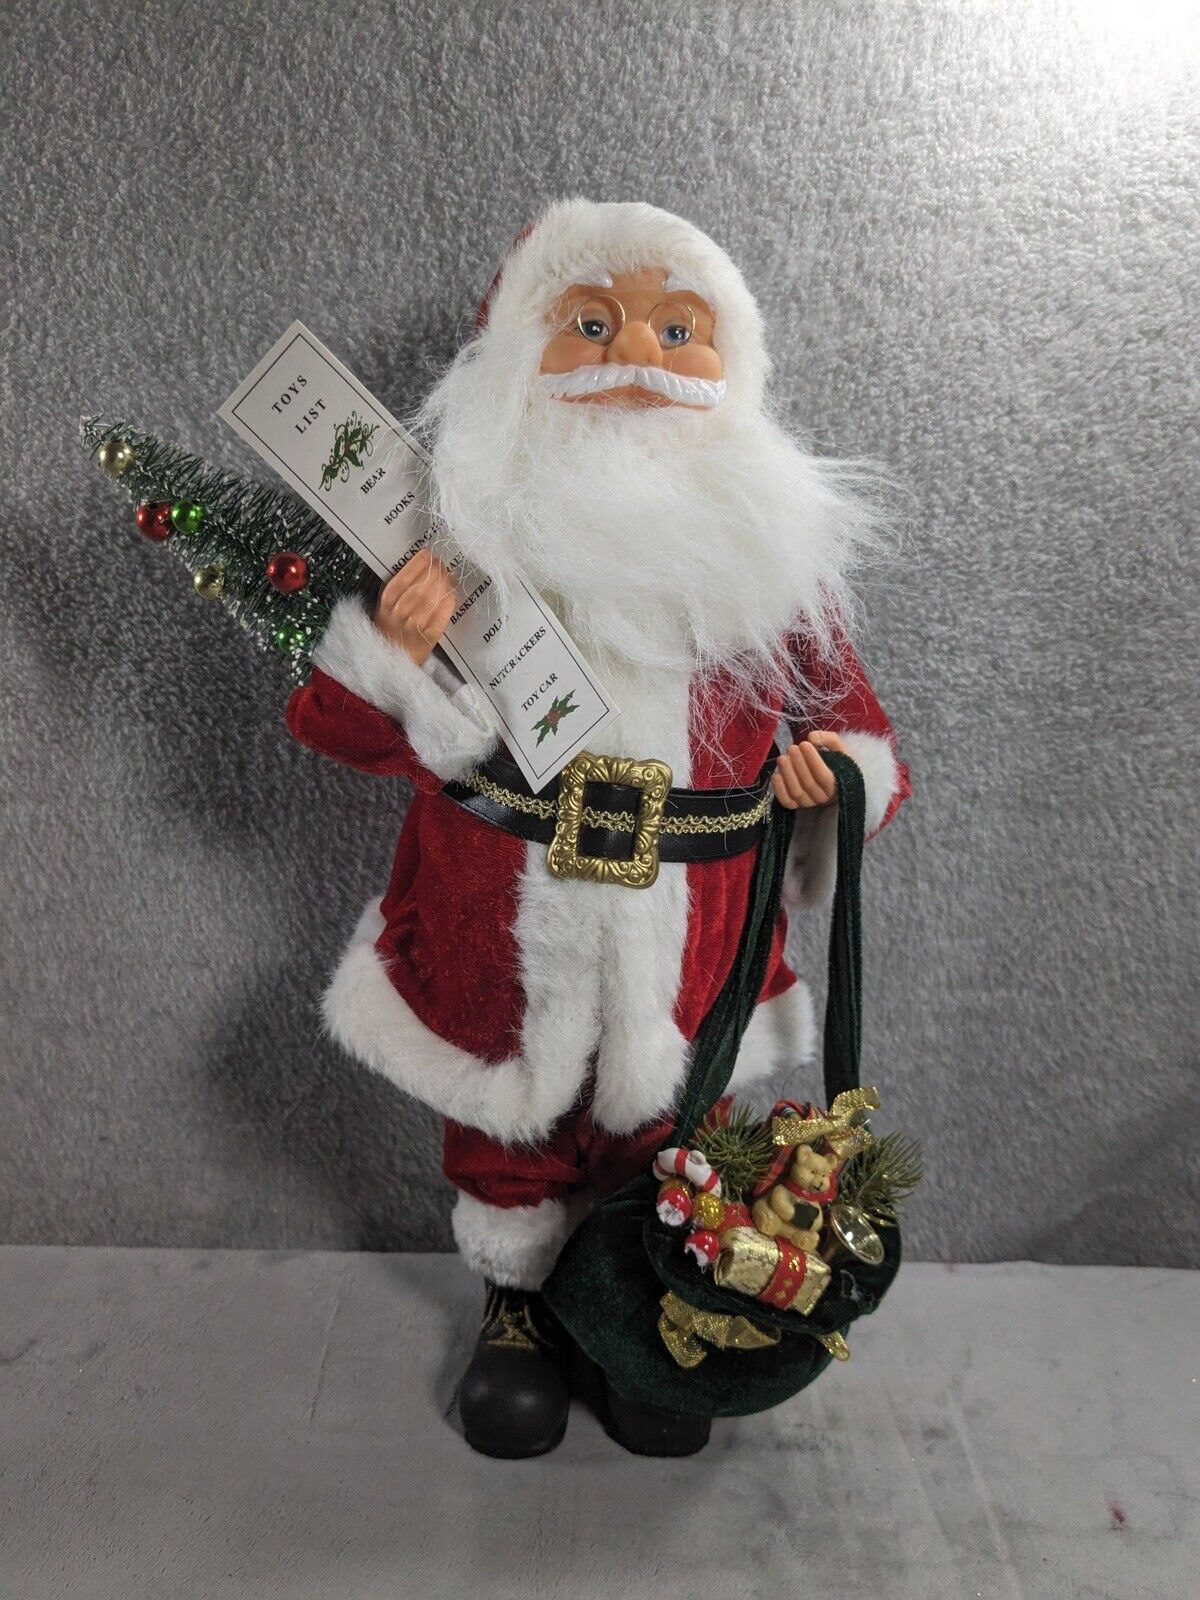 St Nicholas Spirit Of Santa Claus Collection Holding A List & Bag Of Gifts 18”